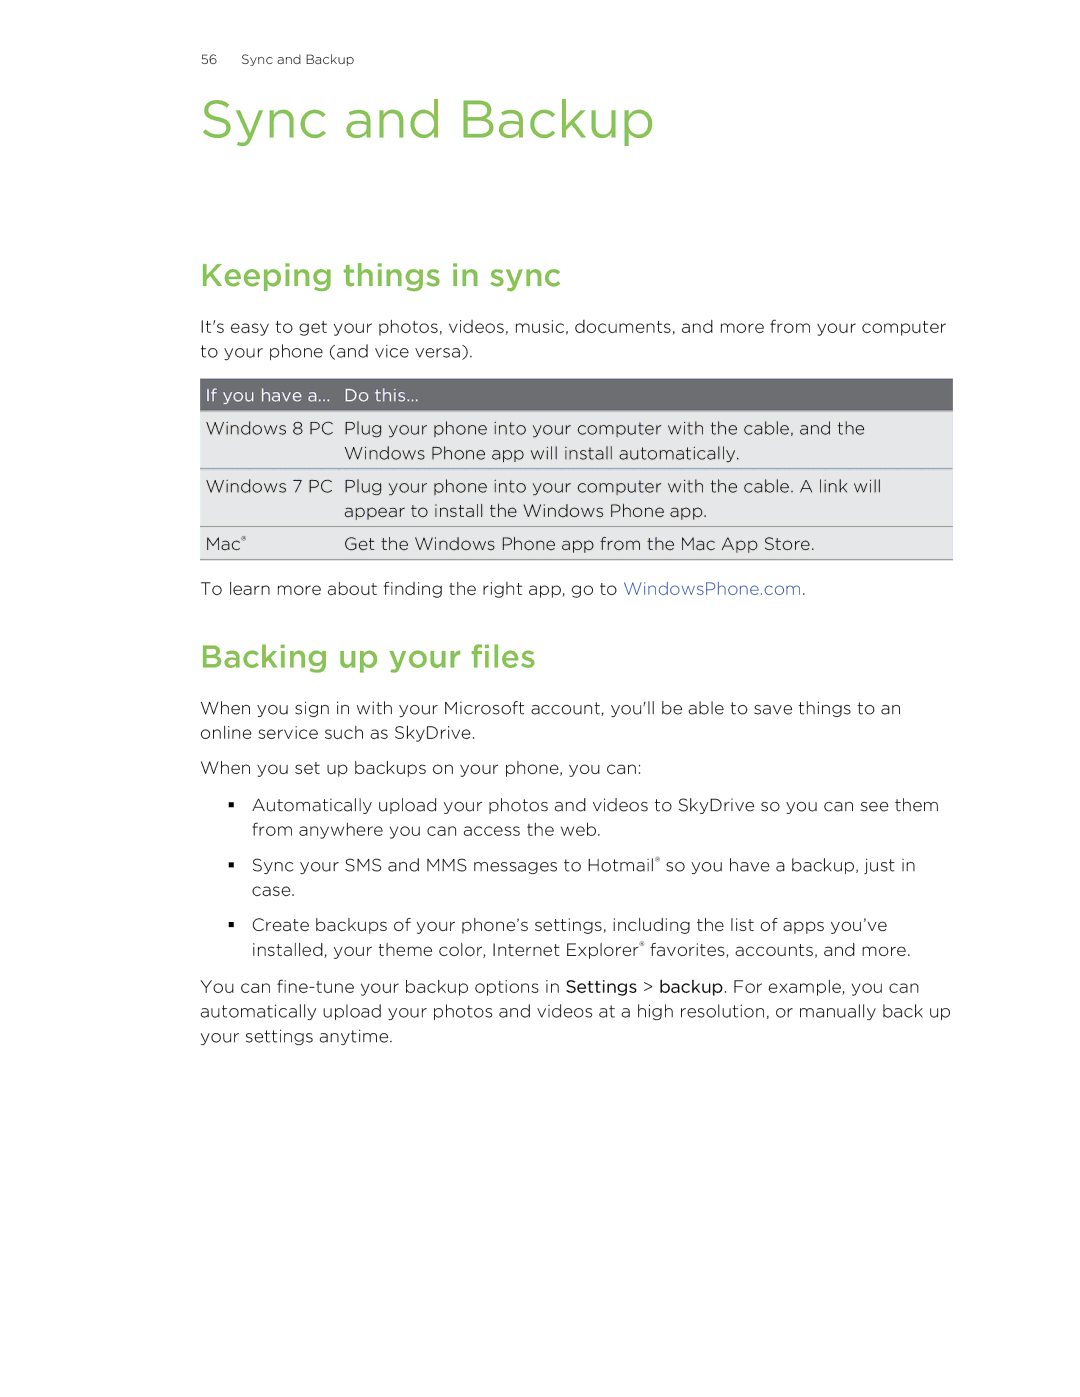 HTC 8X manual Sync and Backup, Keeping things in sync, Backing up your files 